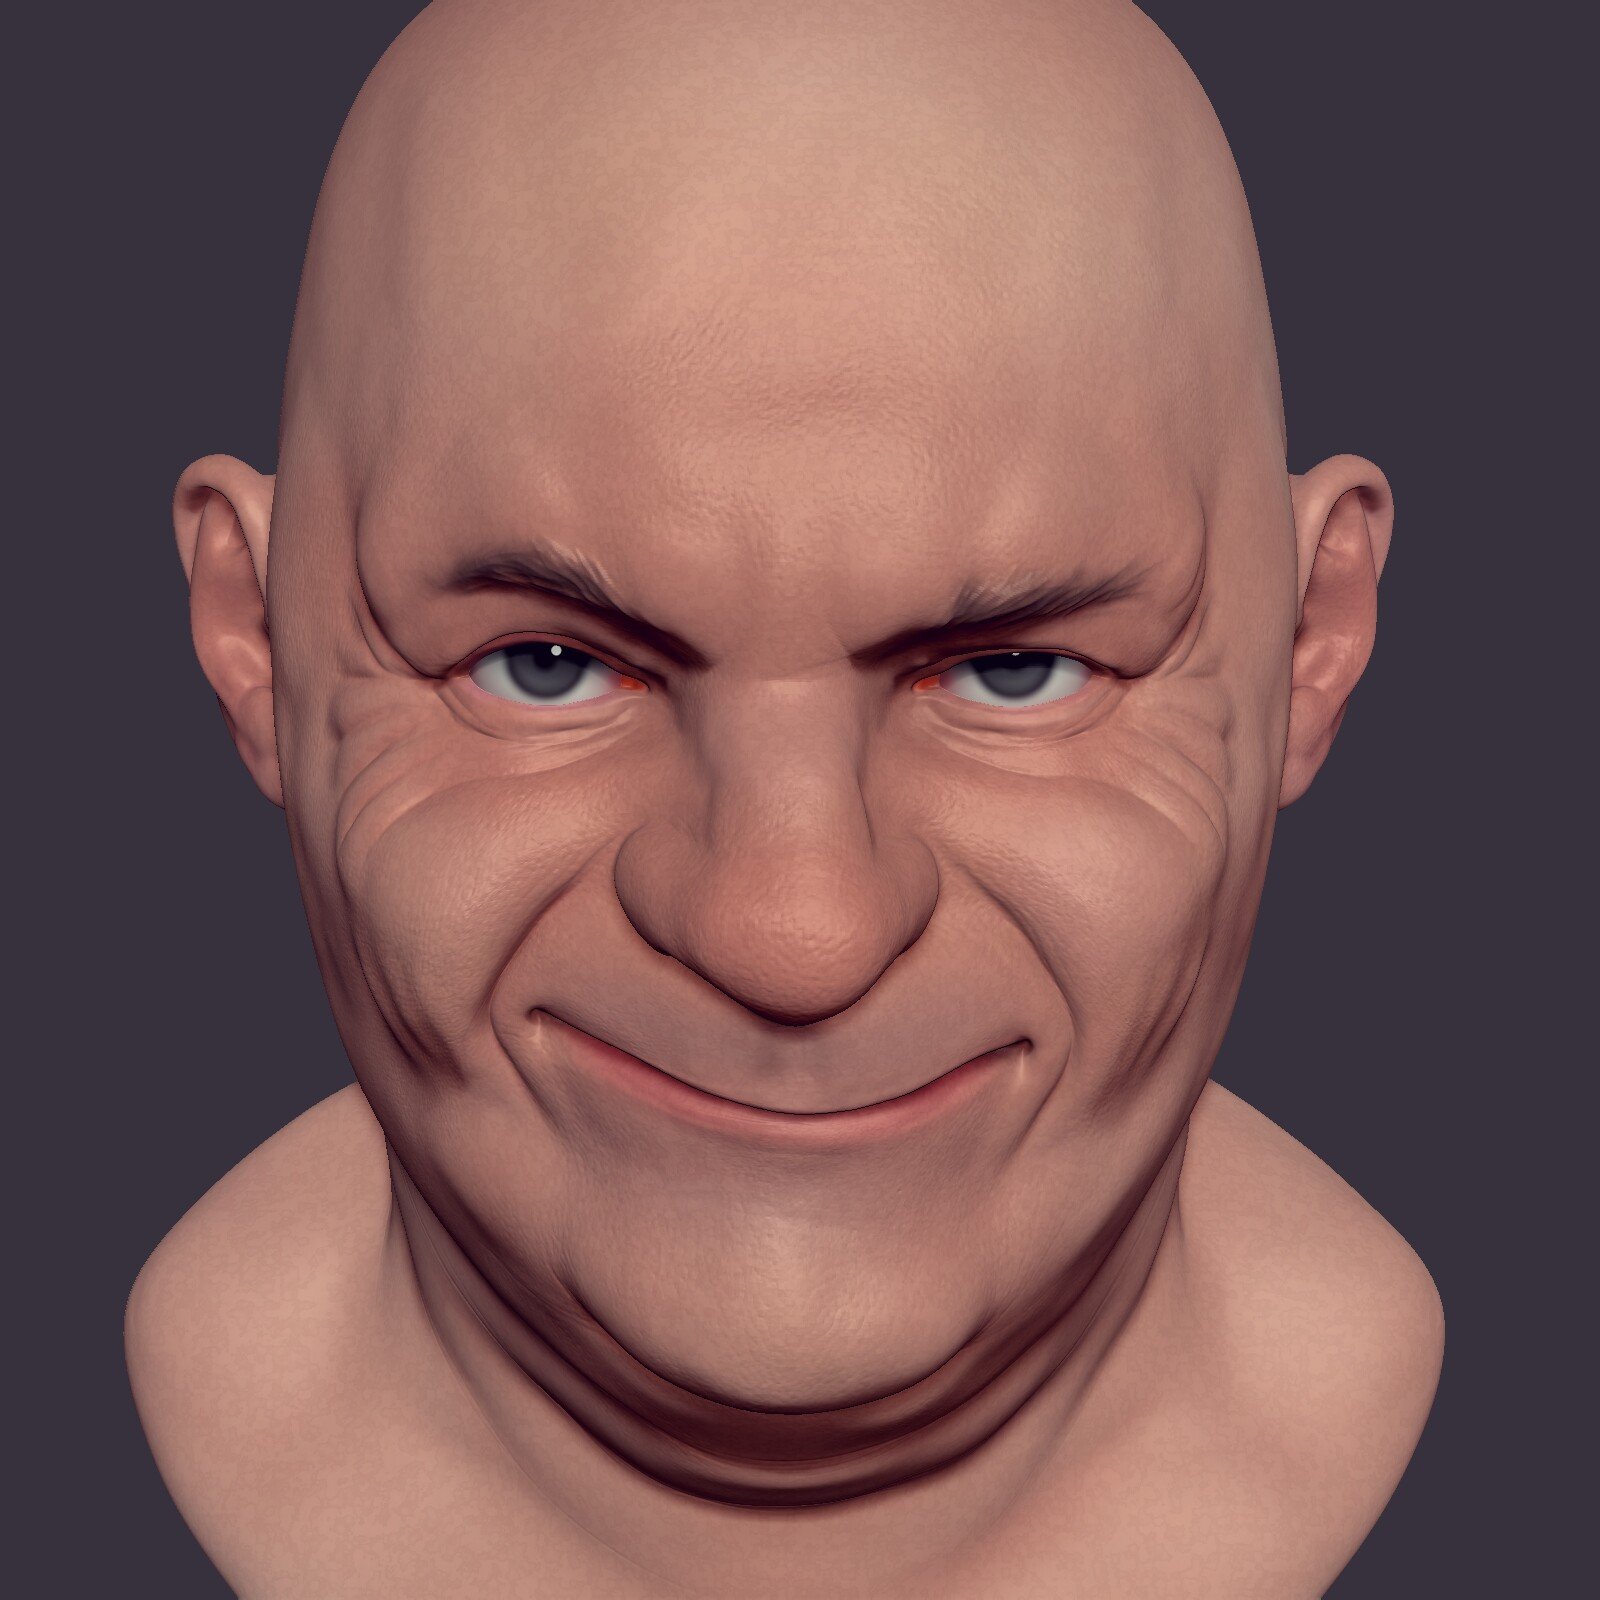 fat guy zbrush reference